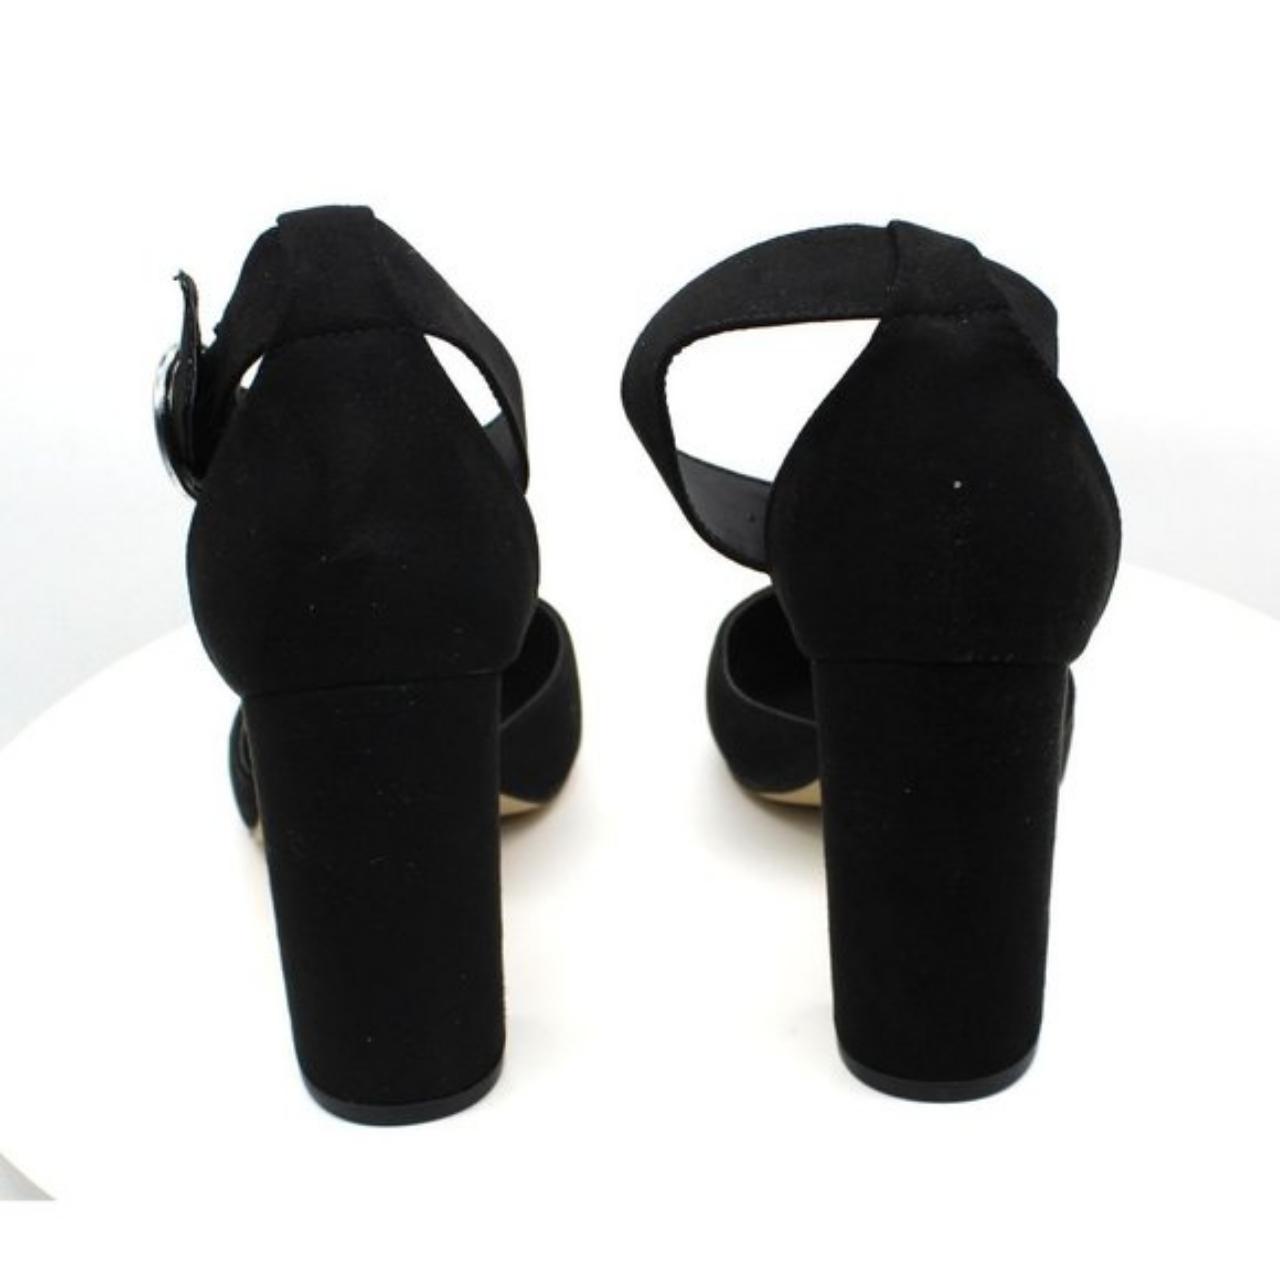 Product Image 4 - Madden Girl Saxon Two-Piece Pumps

A